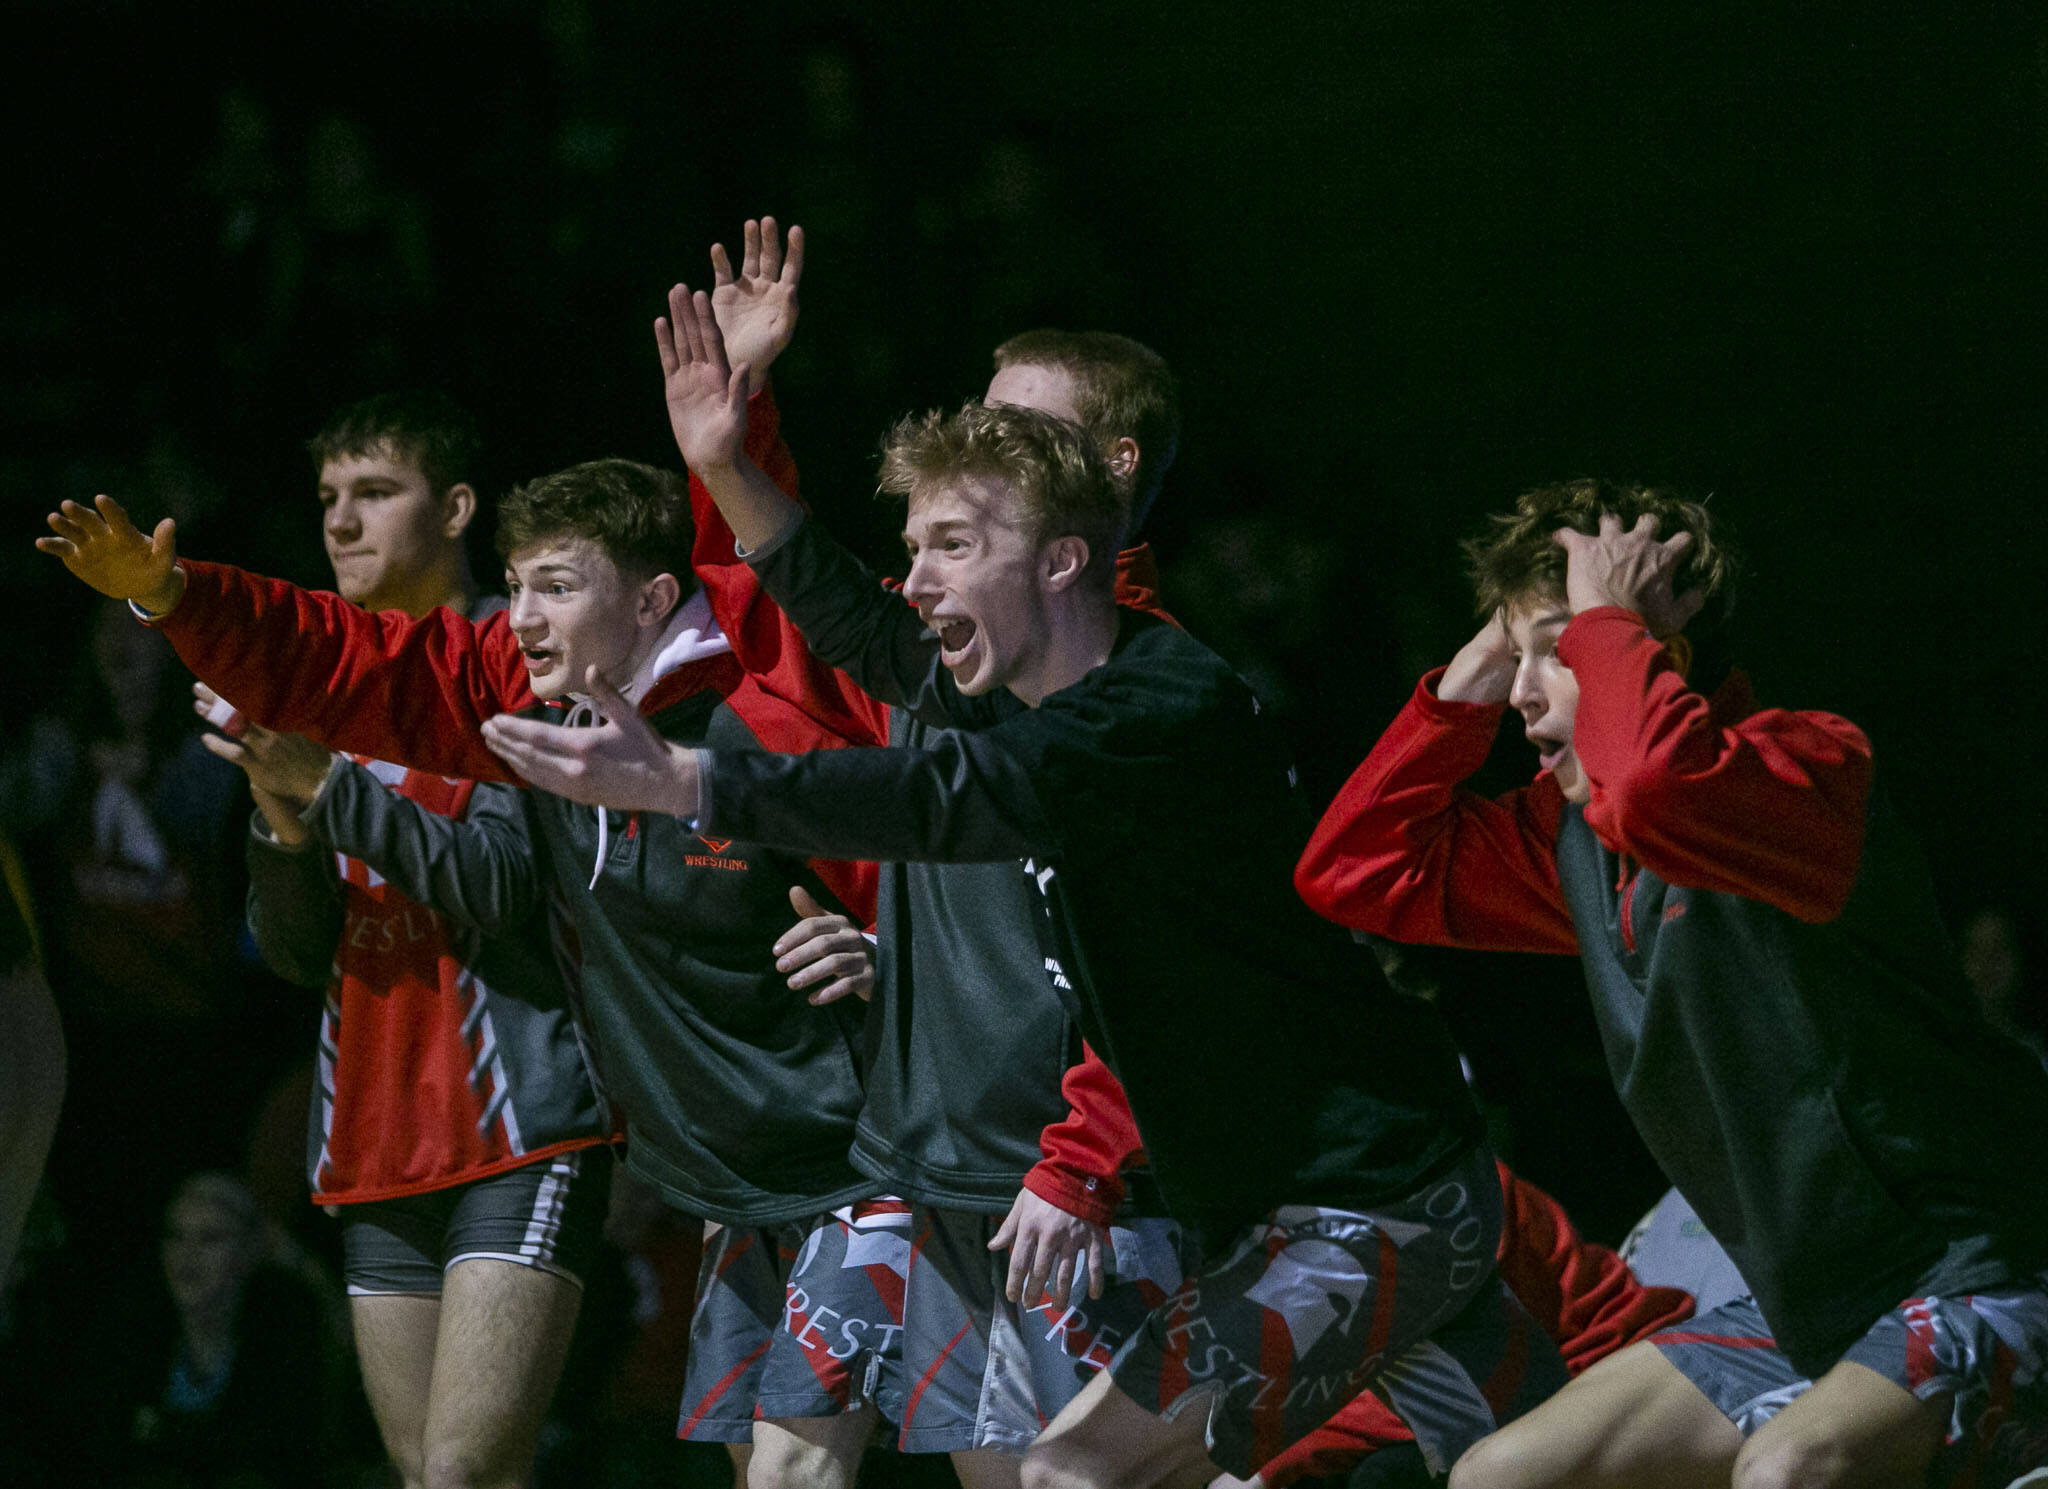 Stanwood wrestlers react to a pin during a match against Arlington on Jan. 24 in Arlington. The Spartans qualified 11 wrestlers for Mat Classic XXXIV and have team title aspirations this weekend. (Olivia Vanni / The Herald)